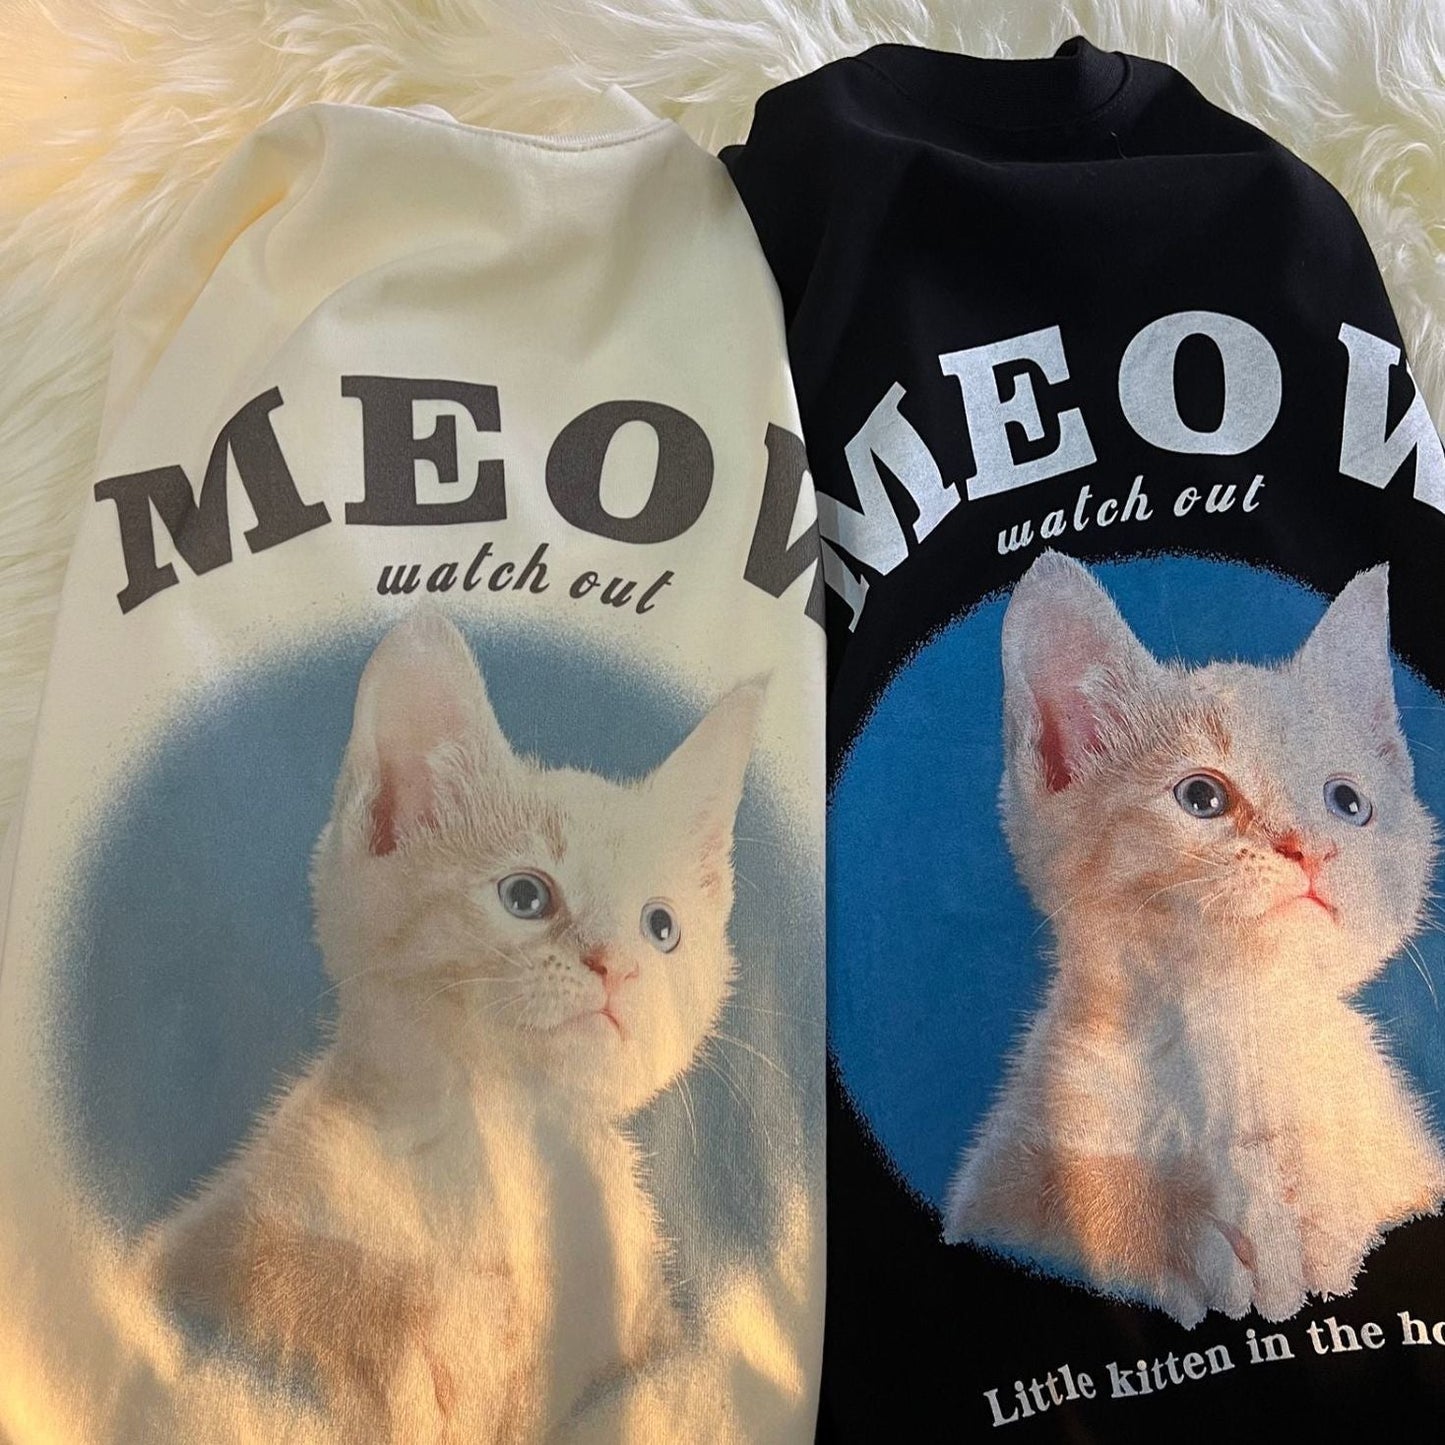 "Meow Watch Out" Adorable Cat Streetwear